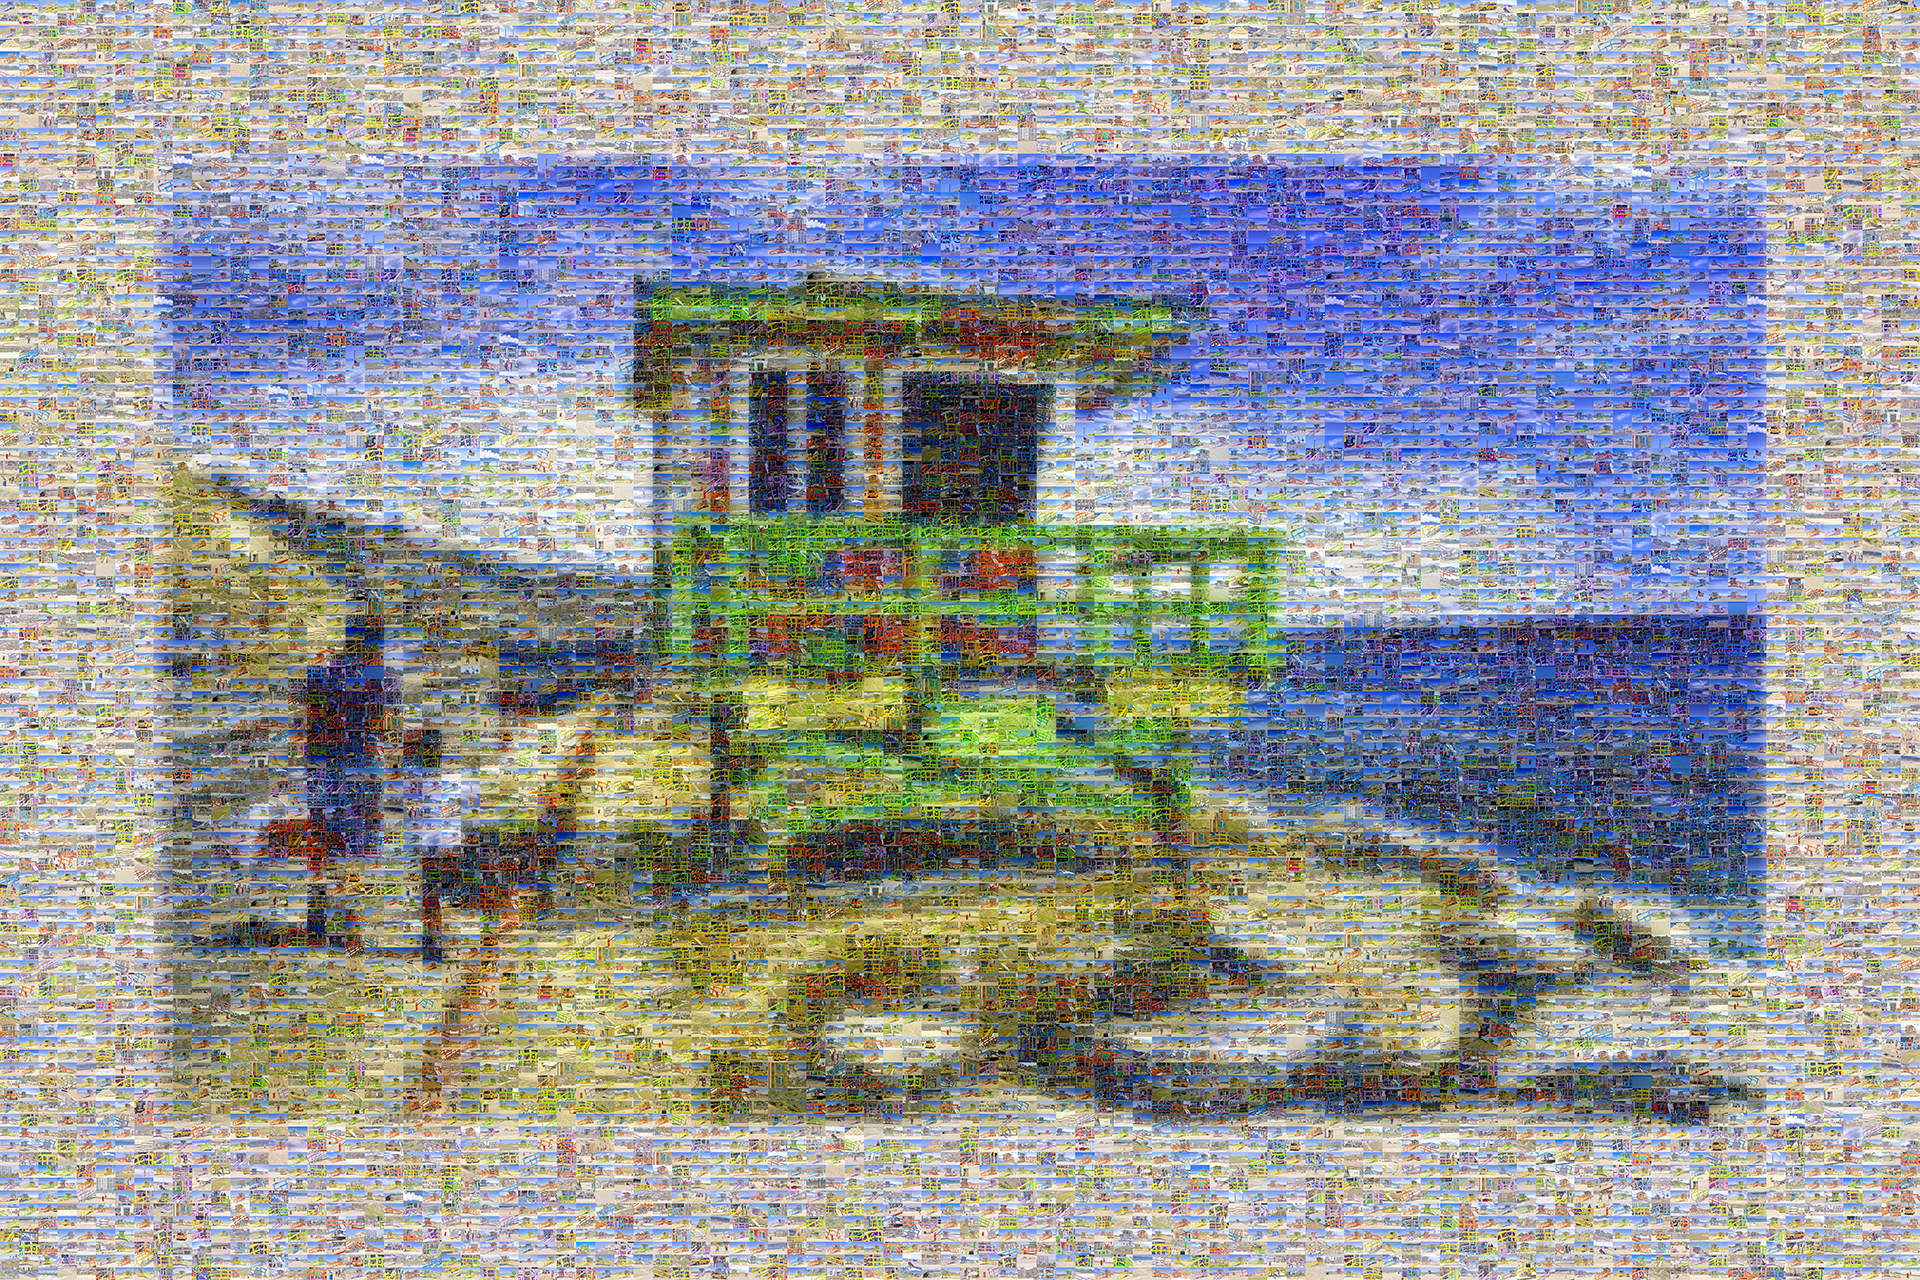 photo mosaic created using 682 images of vibrantly colored lifeguard stands